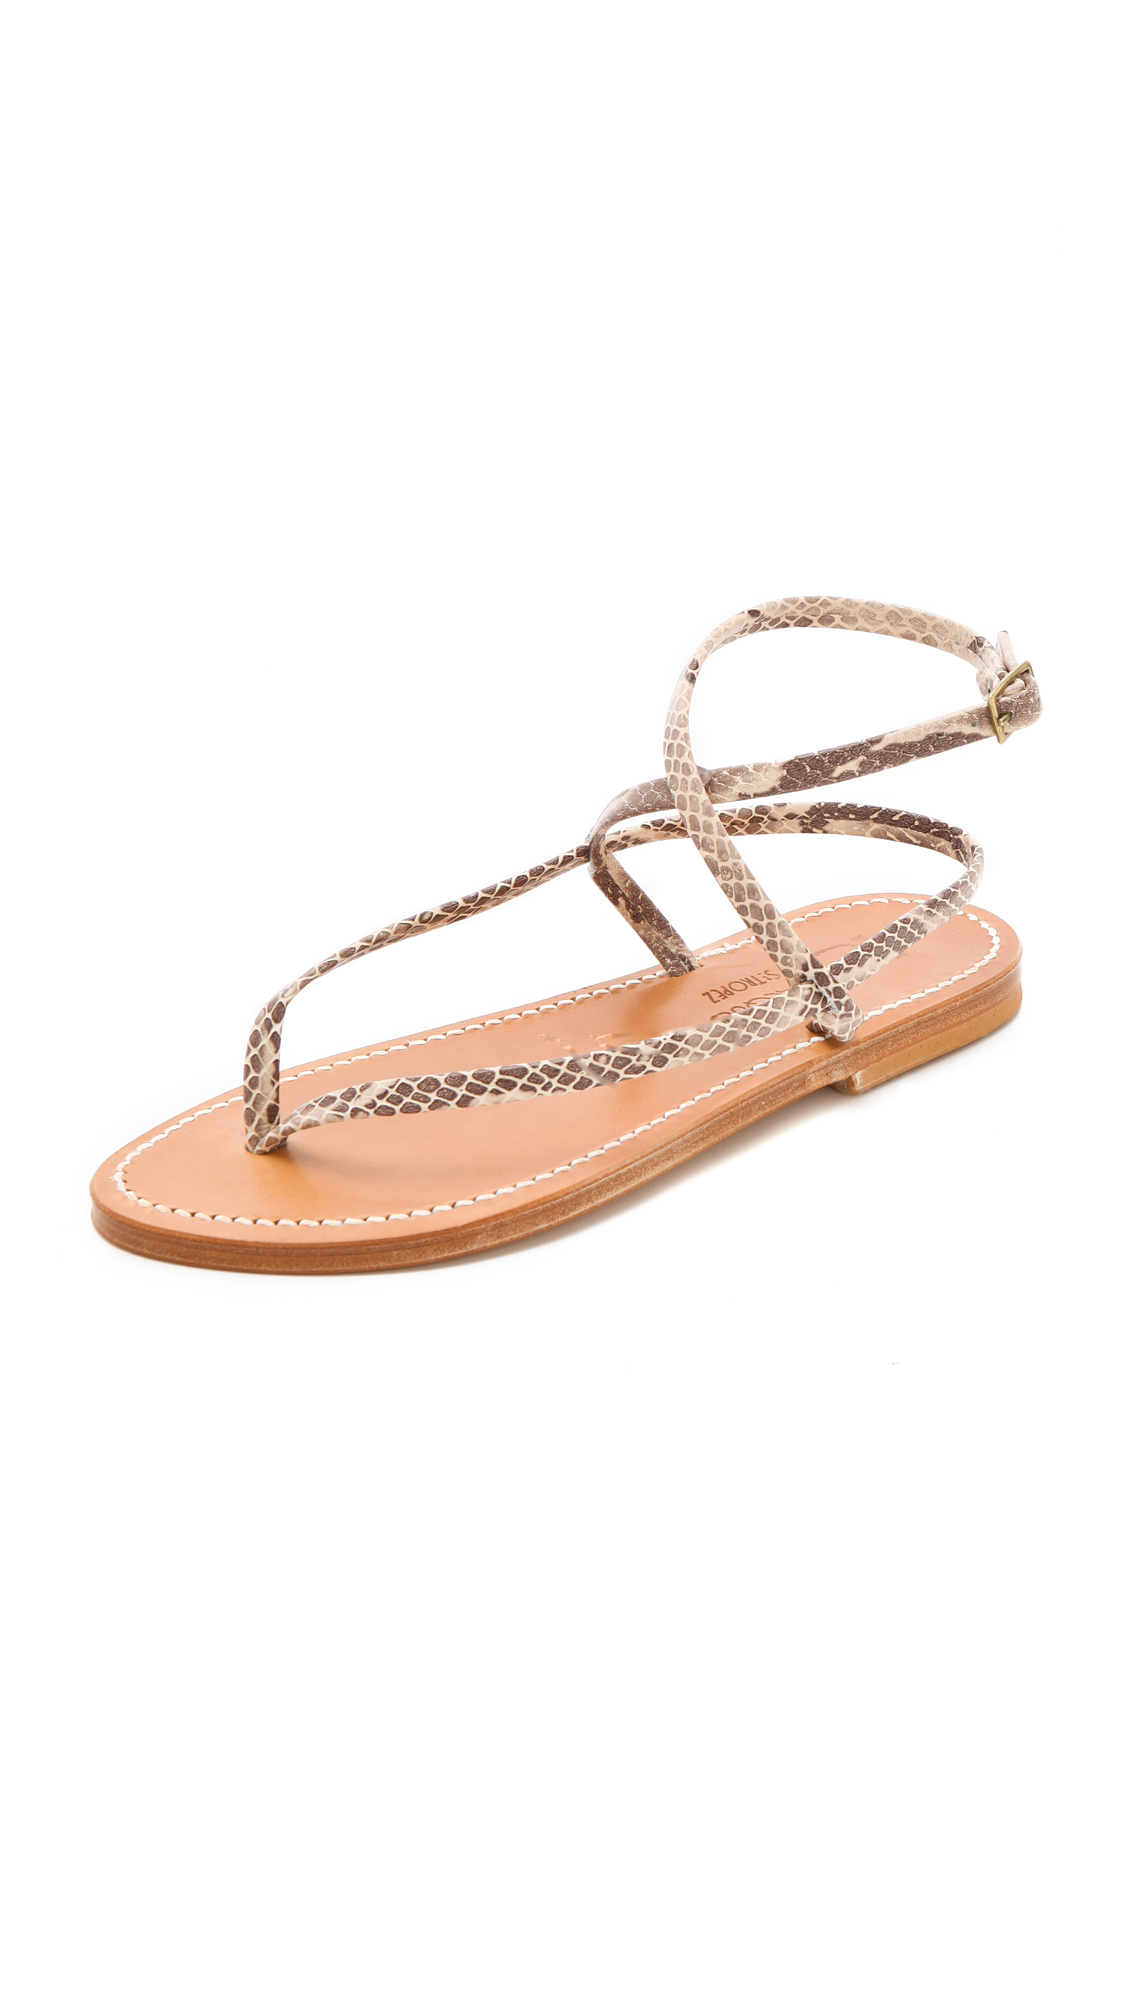 Lyst - K. Jacques Delta Thong Sandals in Metallic